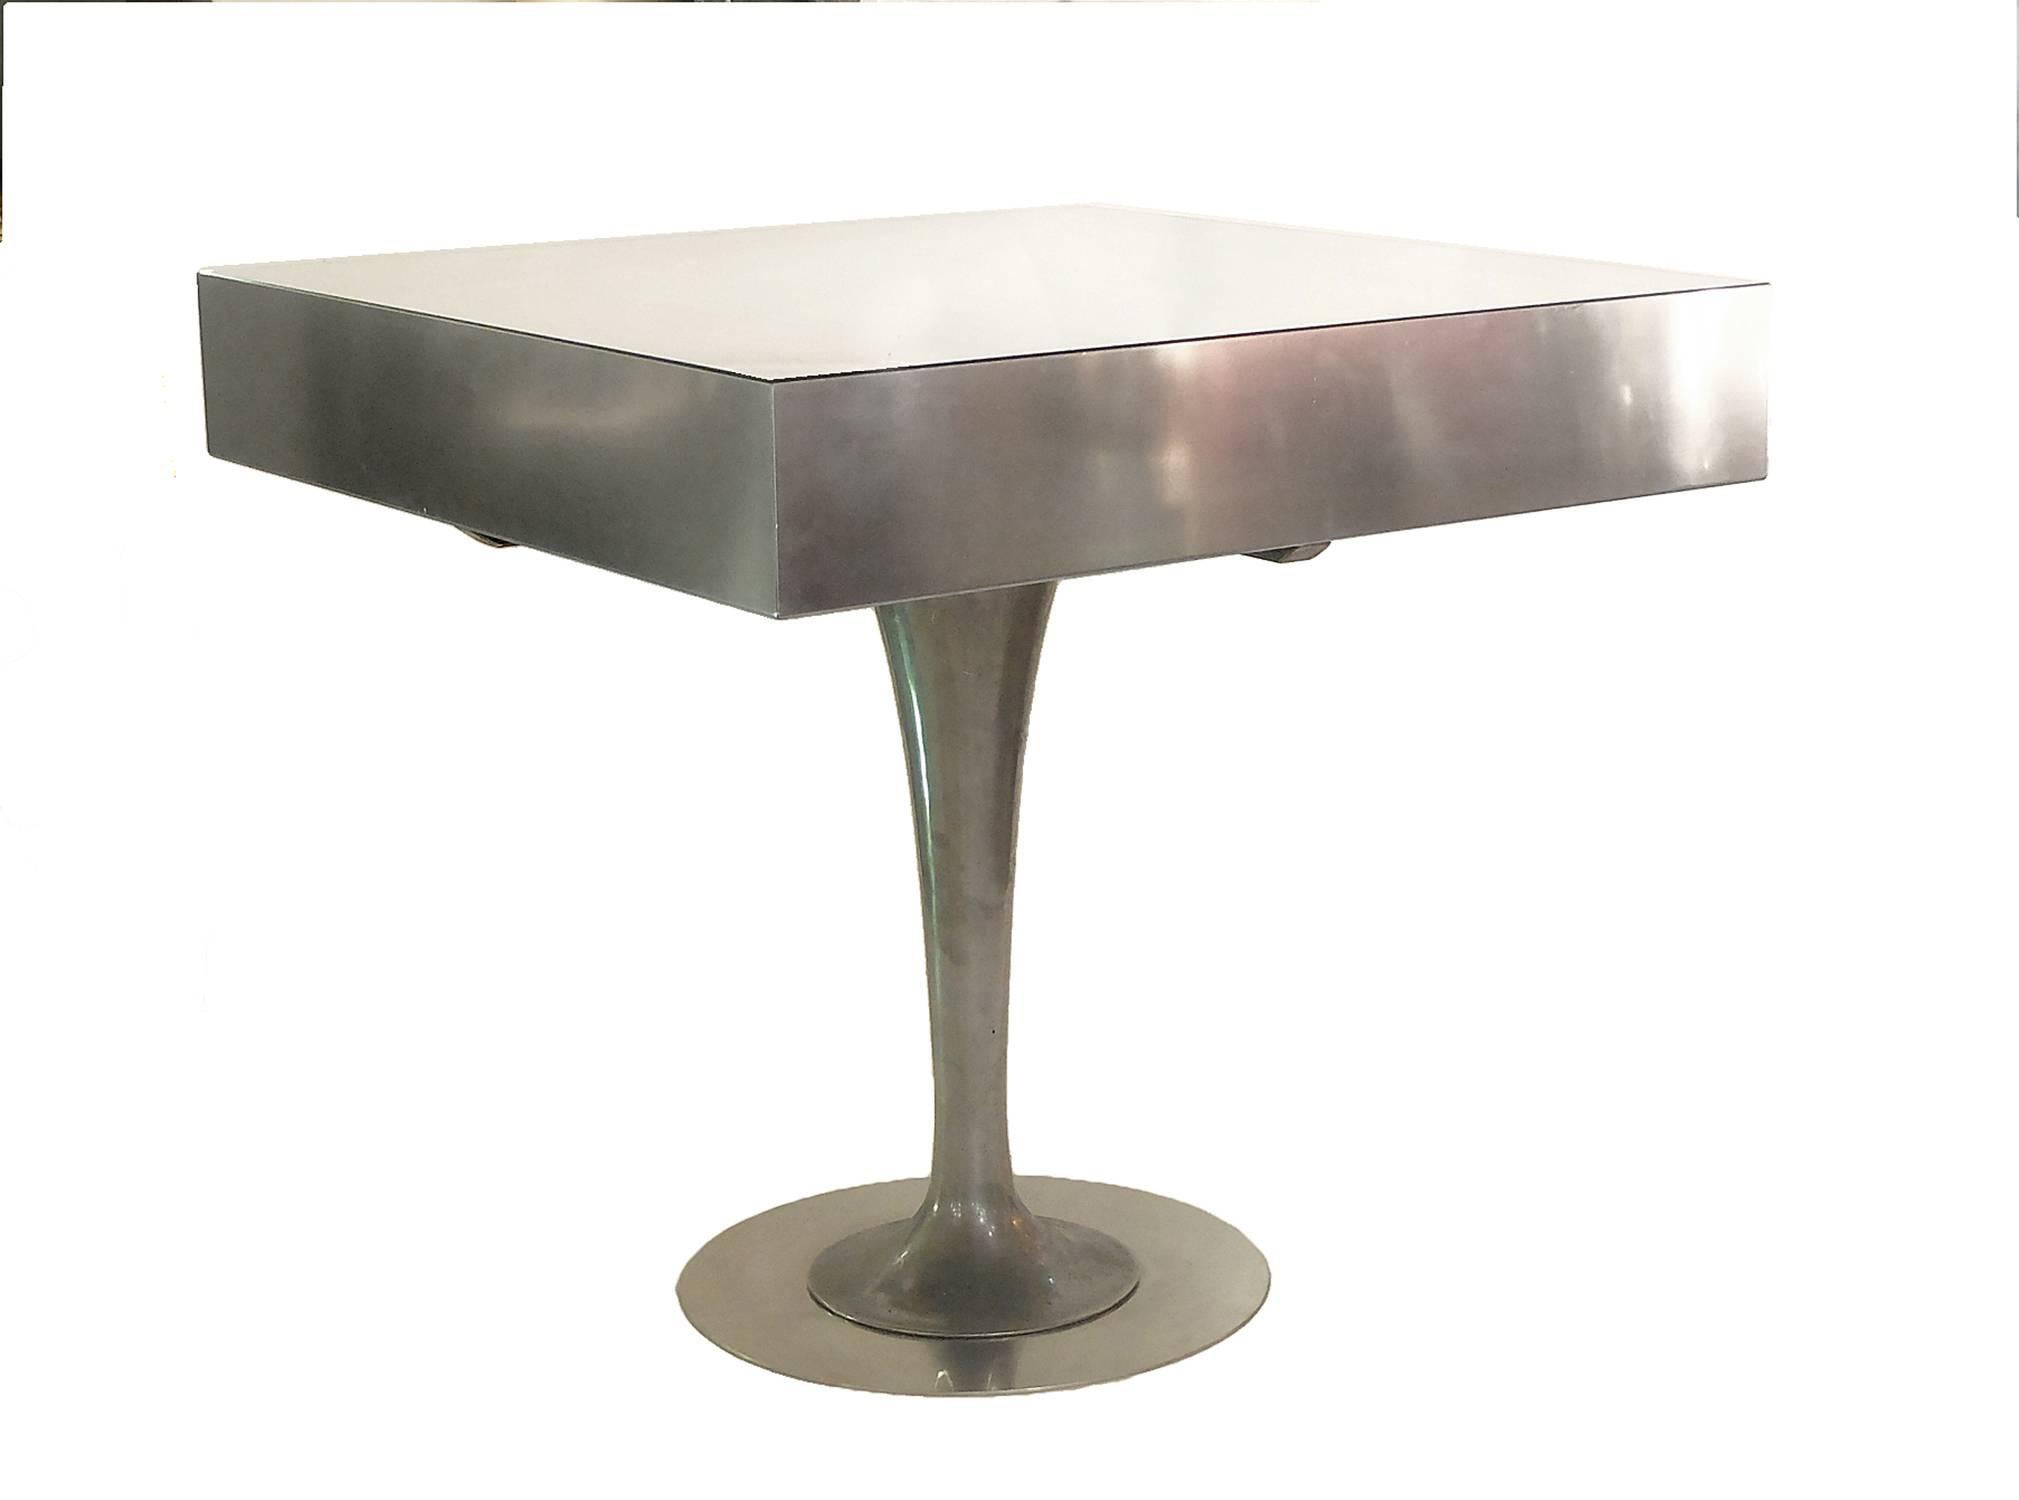 The leg, made out of aluminium, is in the purest American Art Deco.
The round base rise and opens wide to the top. The top is made out of a juxtaposition of cardboard elements, boxed inside an aluminium frame, with glass top.
The entire top is